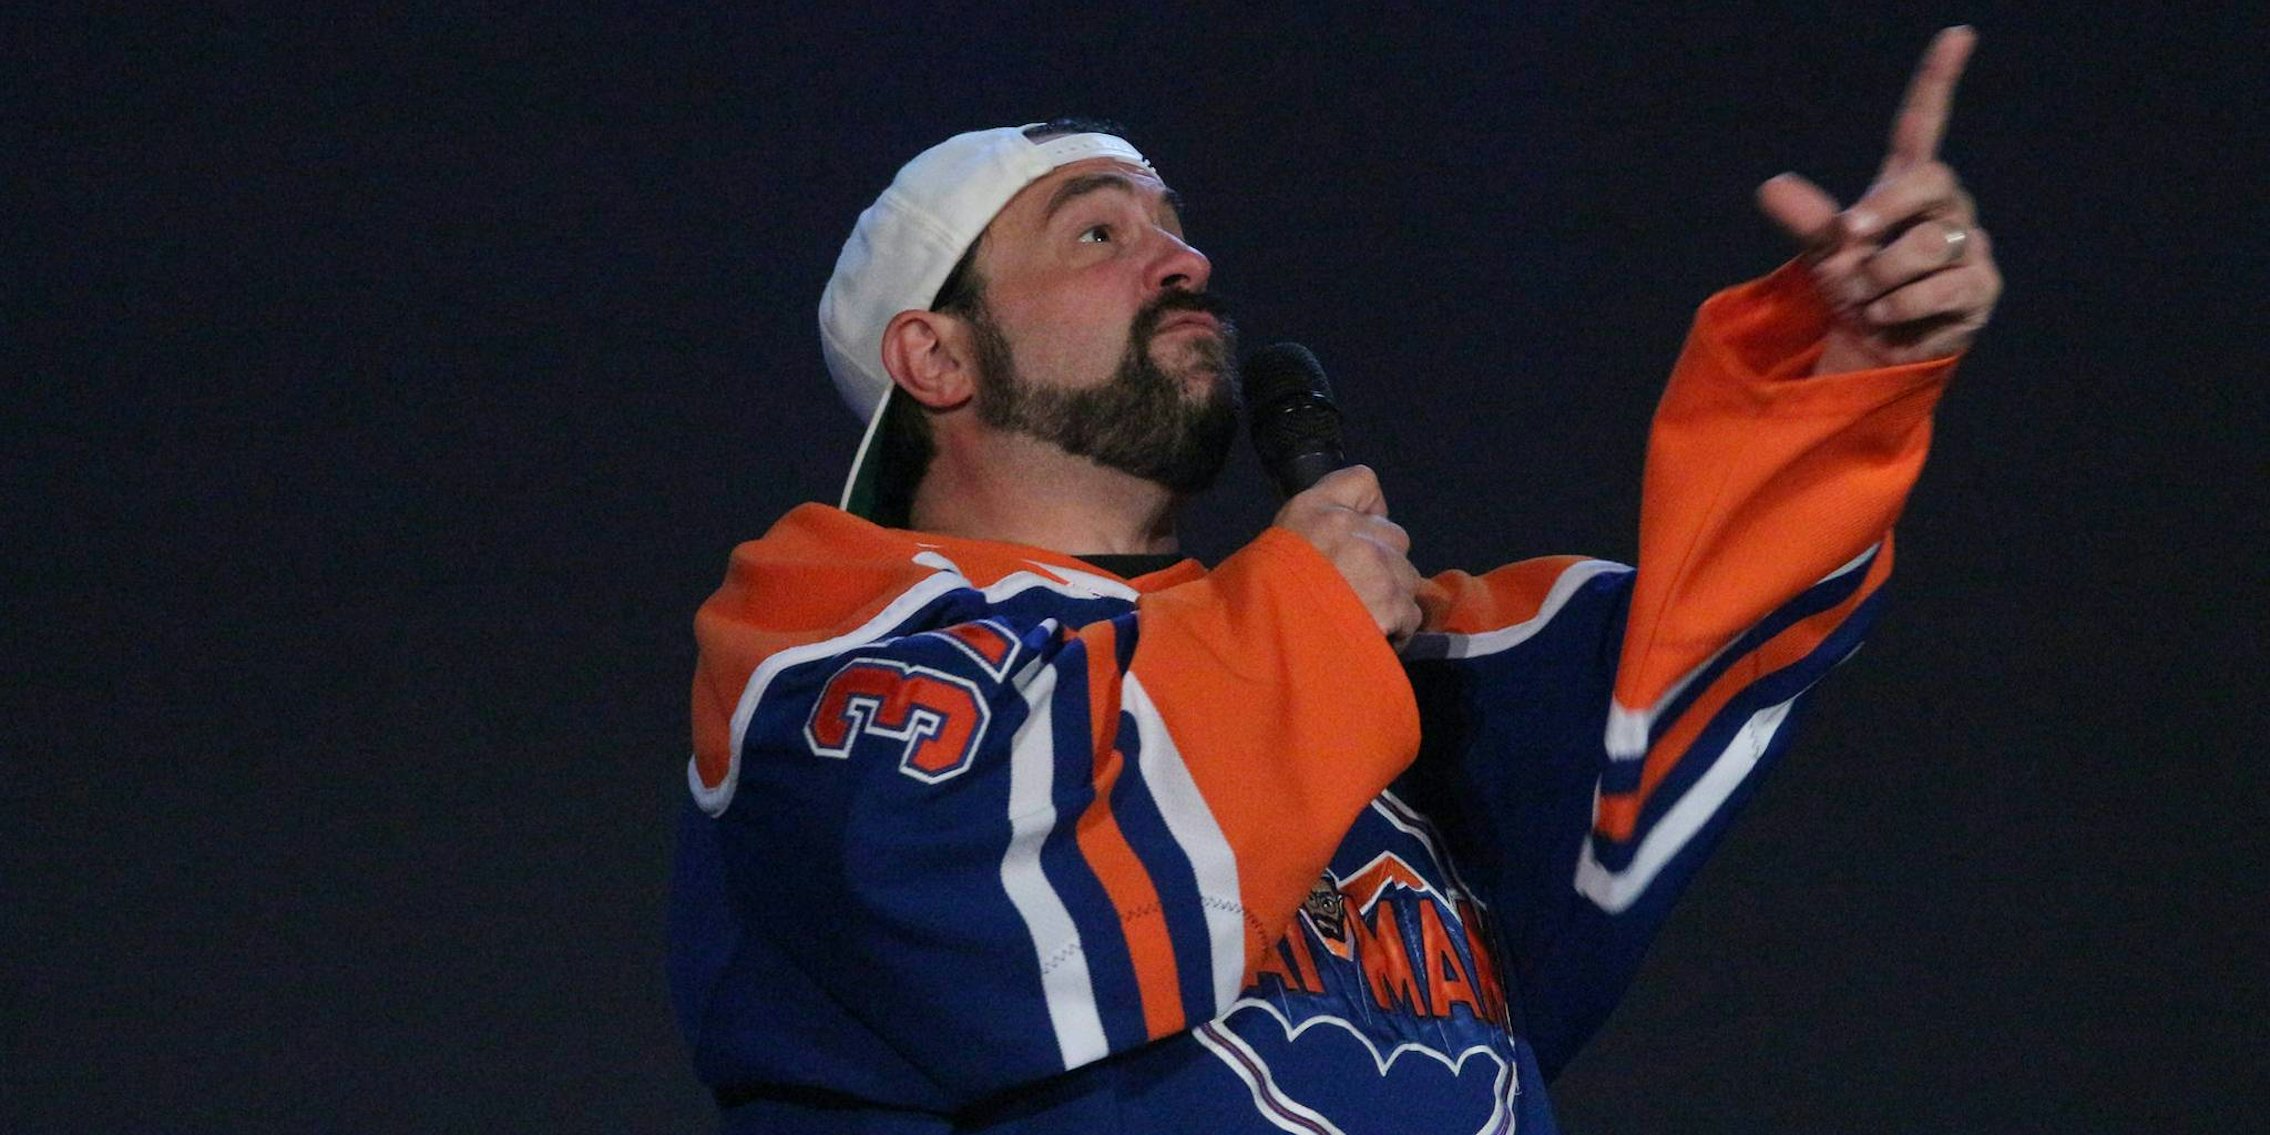 Kevin Smith will host DC Daily on DC Universe